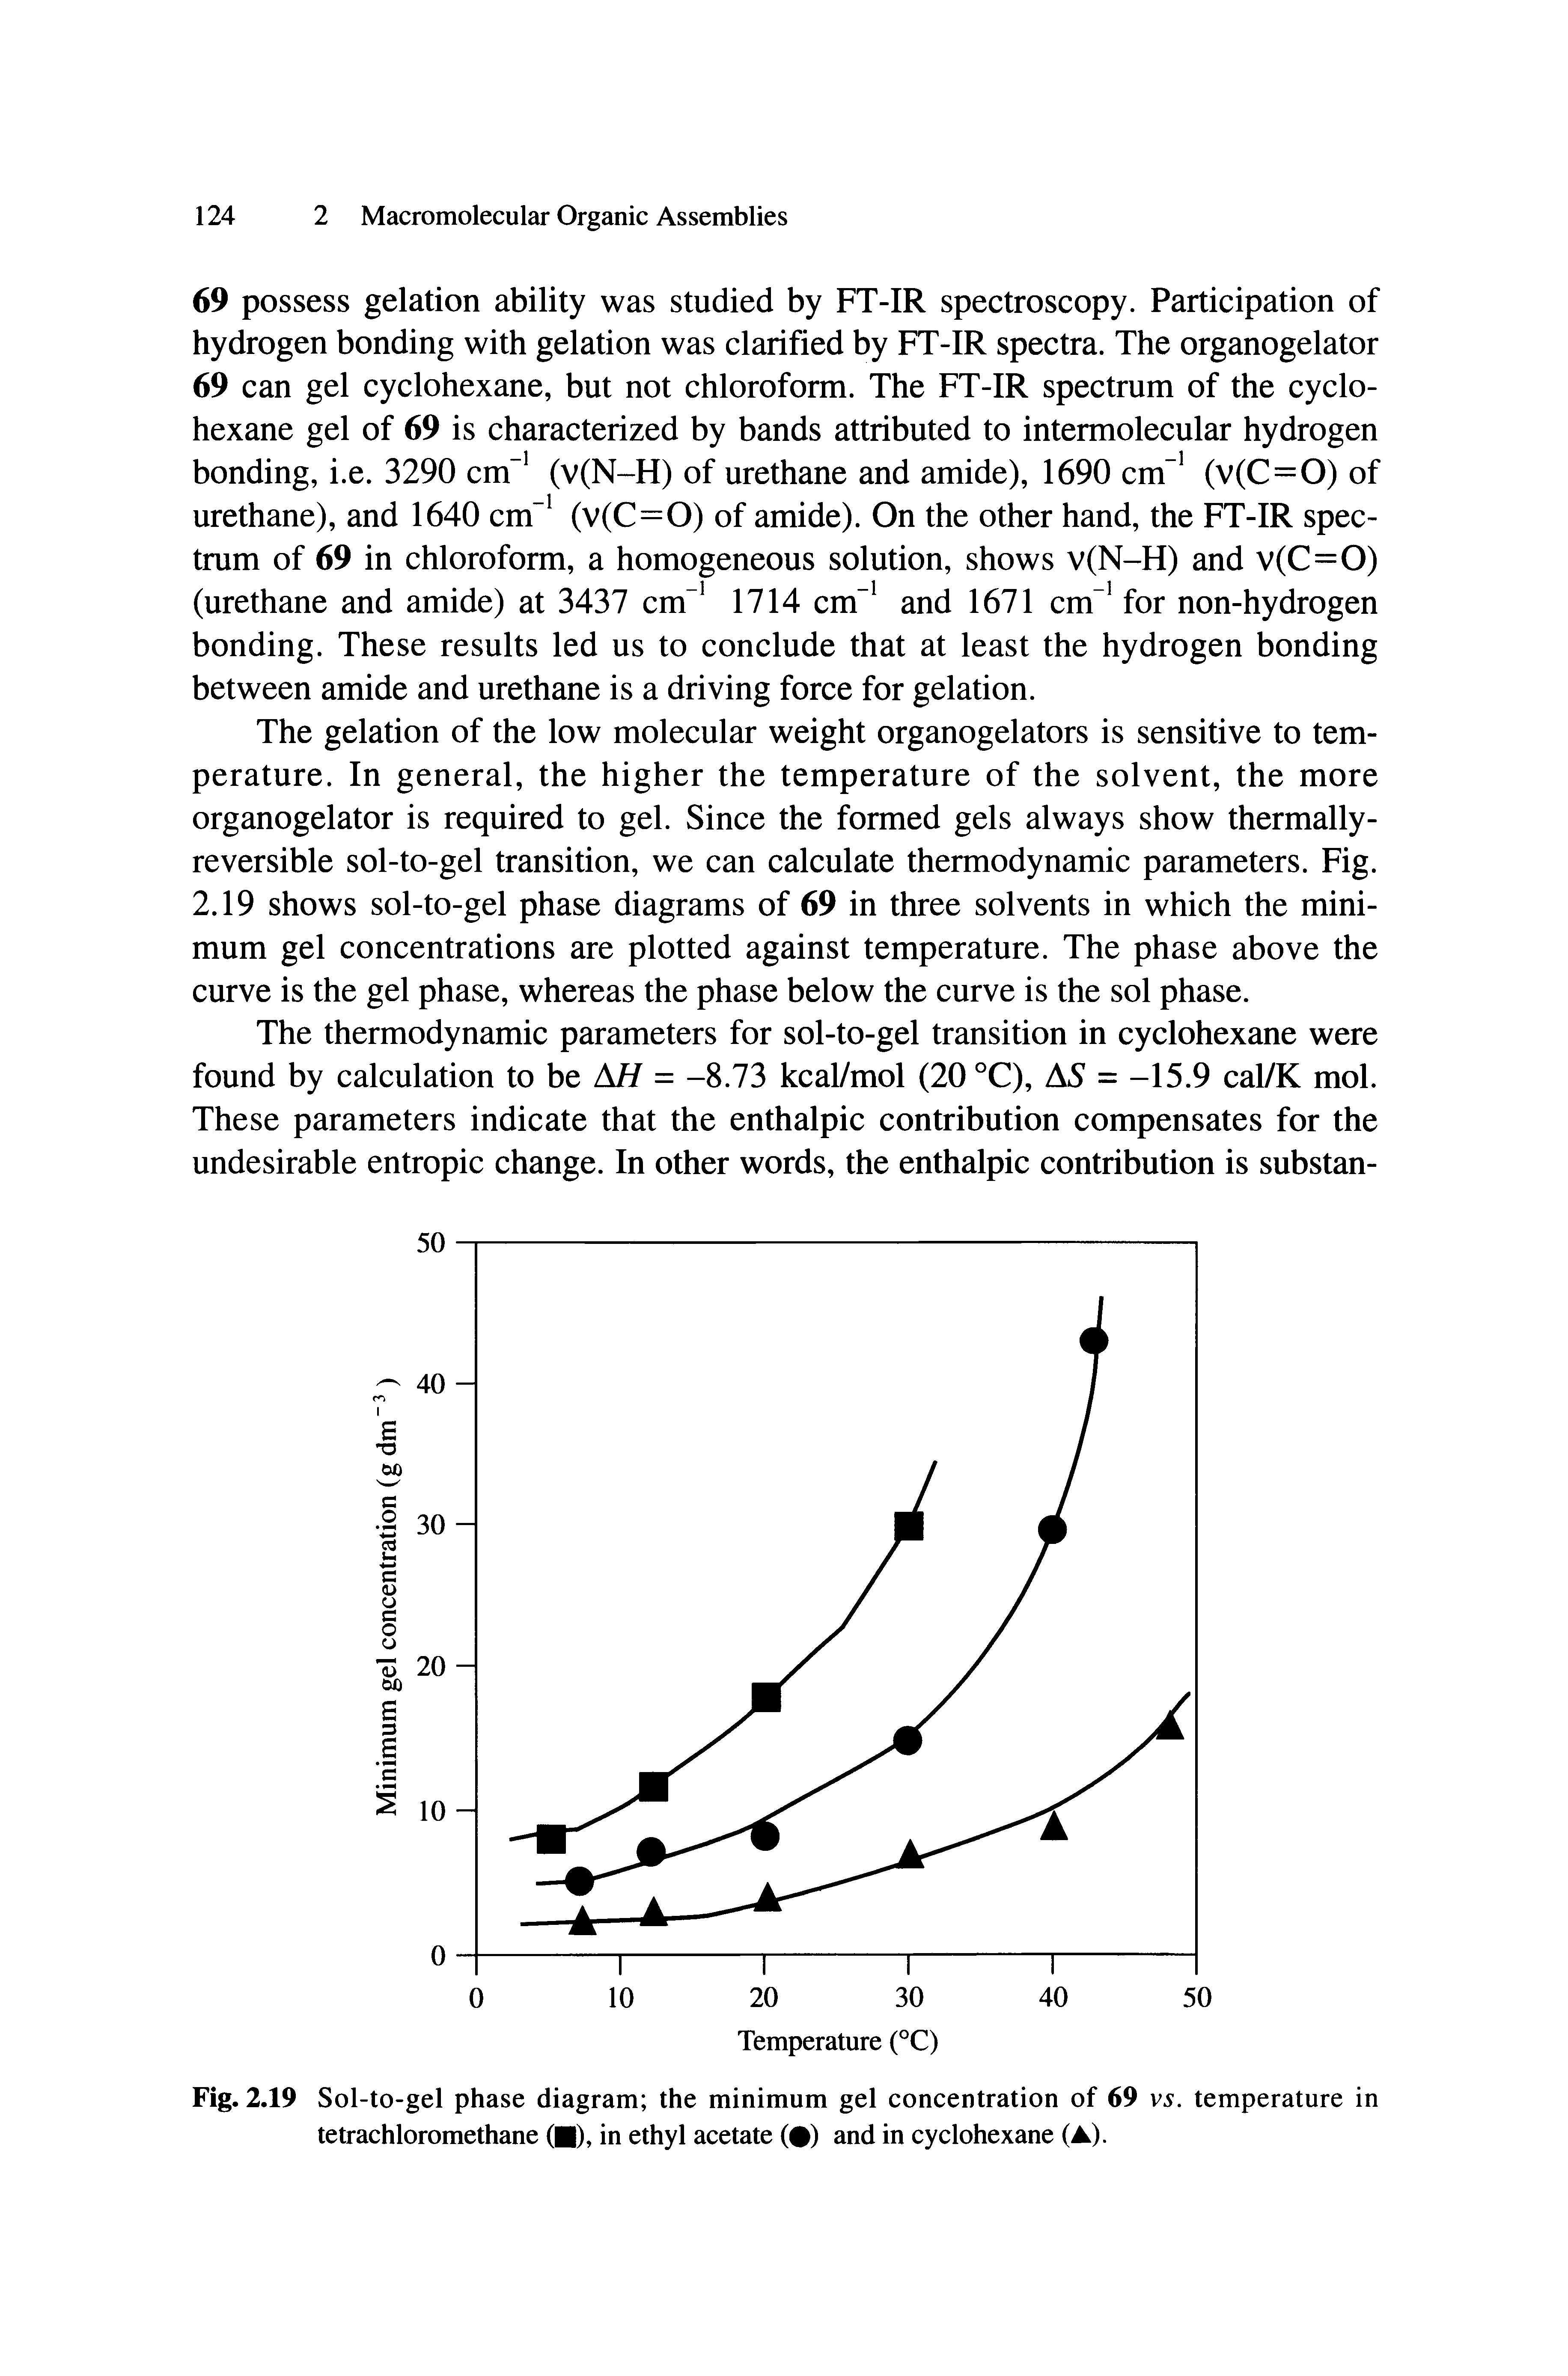 Fig. 2.19 Sol-to-gel phase diagram the minimum gel concentration of 69 V5. temperature in tetrachloromethane ( ), in ethyl acetate (0) and in cyclohexane (A).